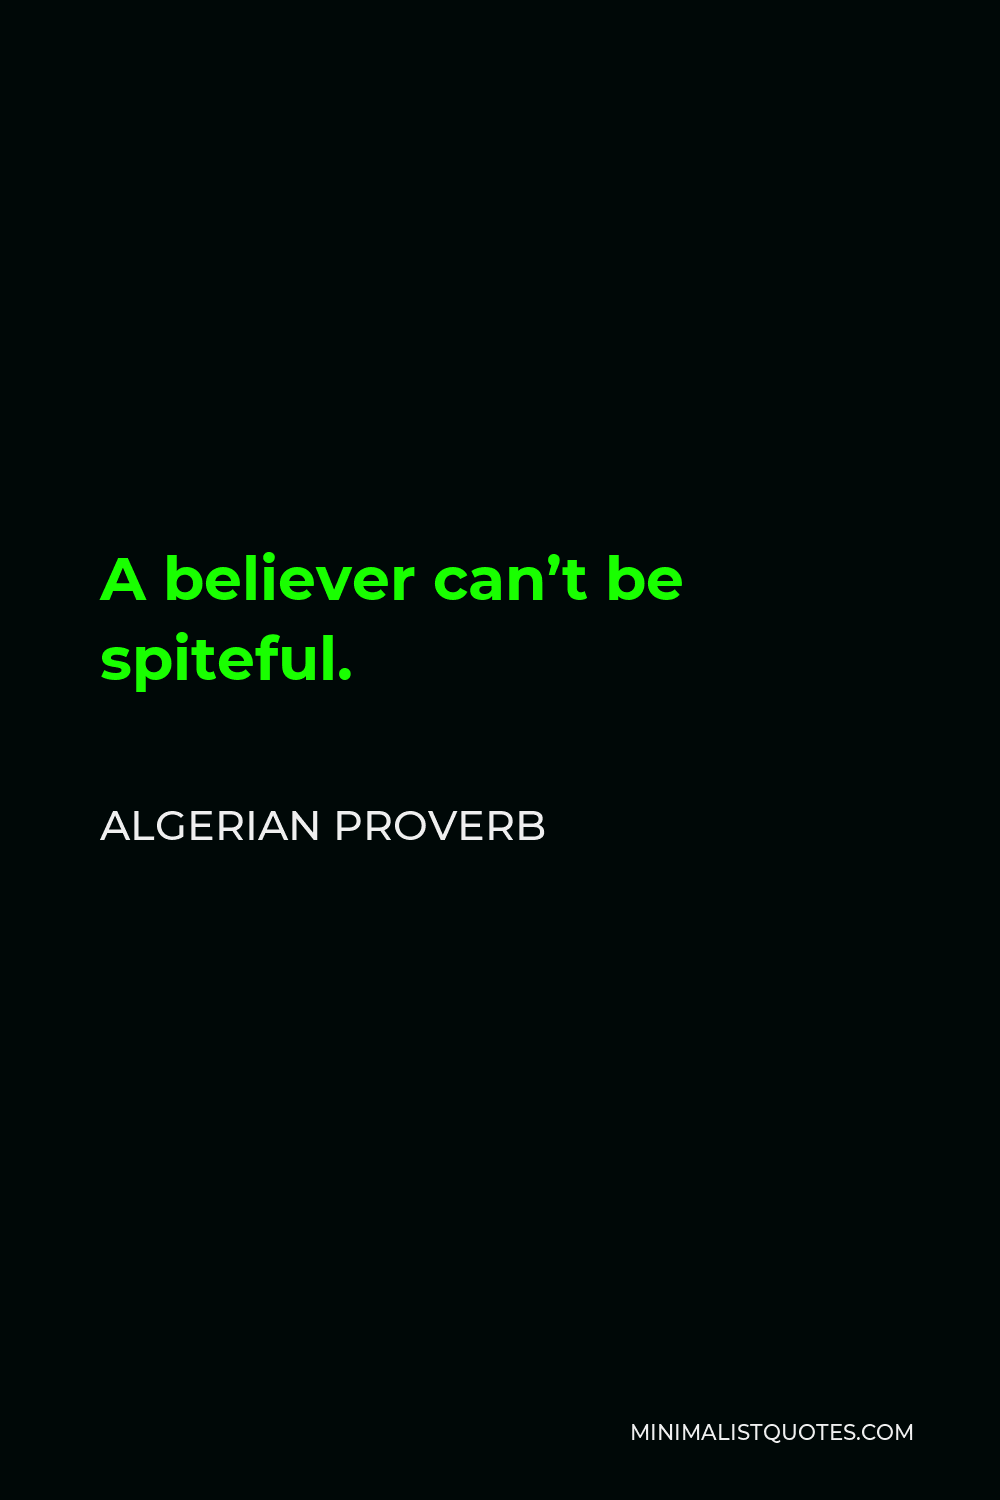 Algerian Proverb Quote - A believer can’t be spiteful.